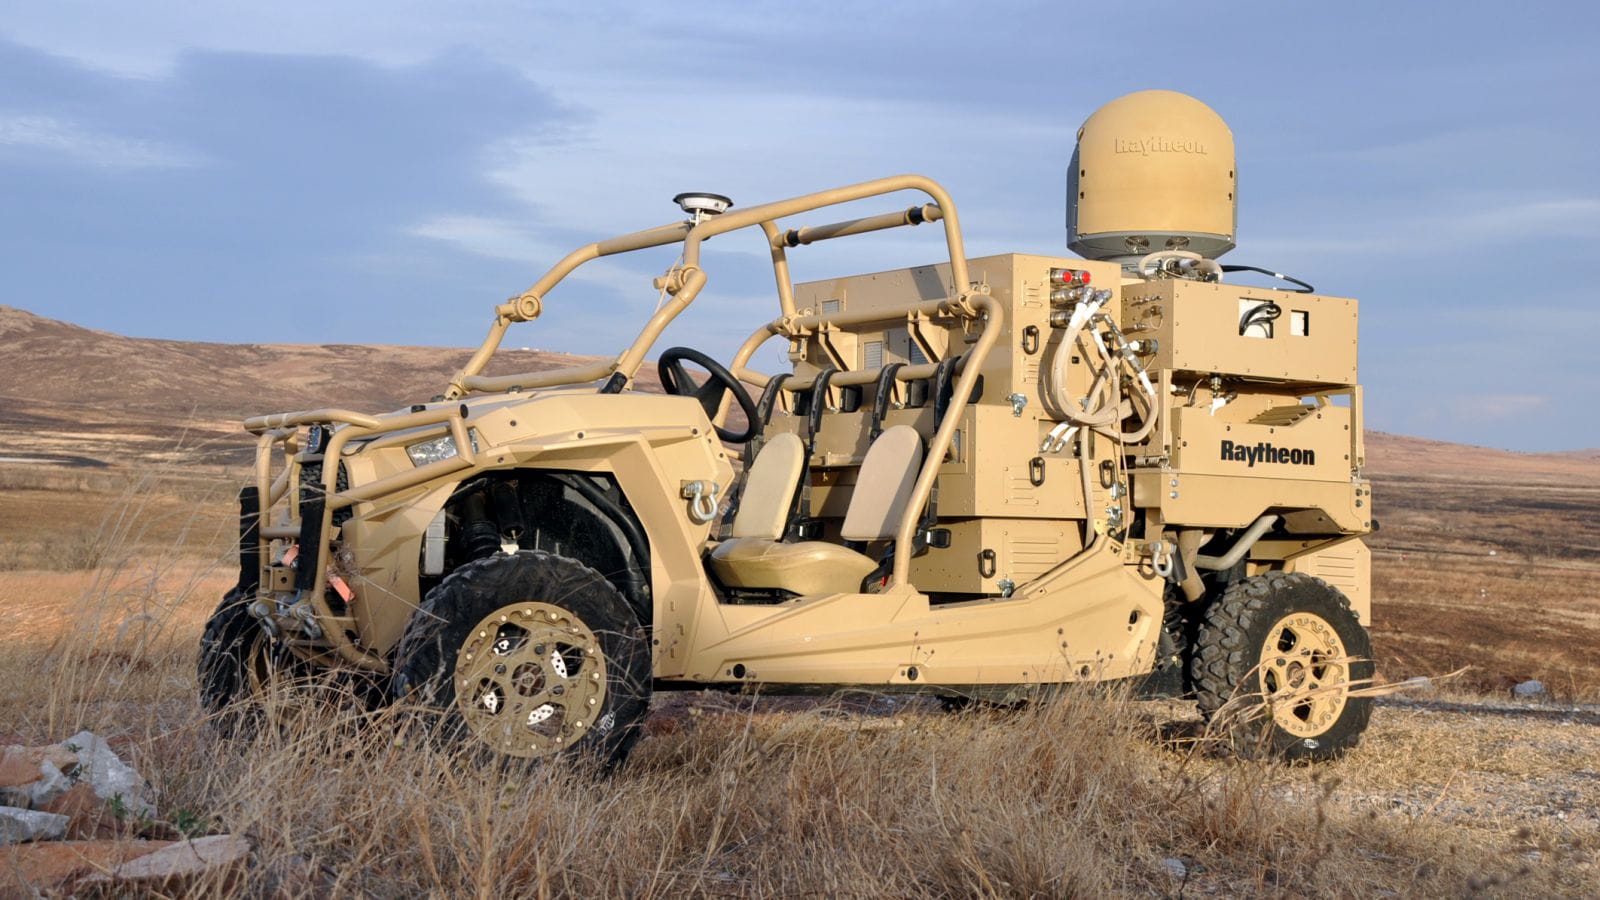 High Energy Laser Weapon System on top of a military vehicle